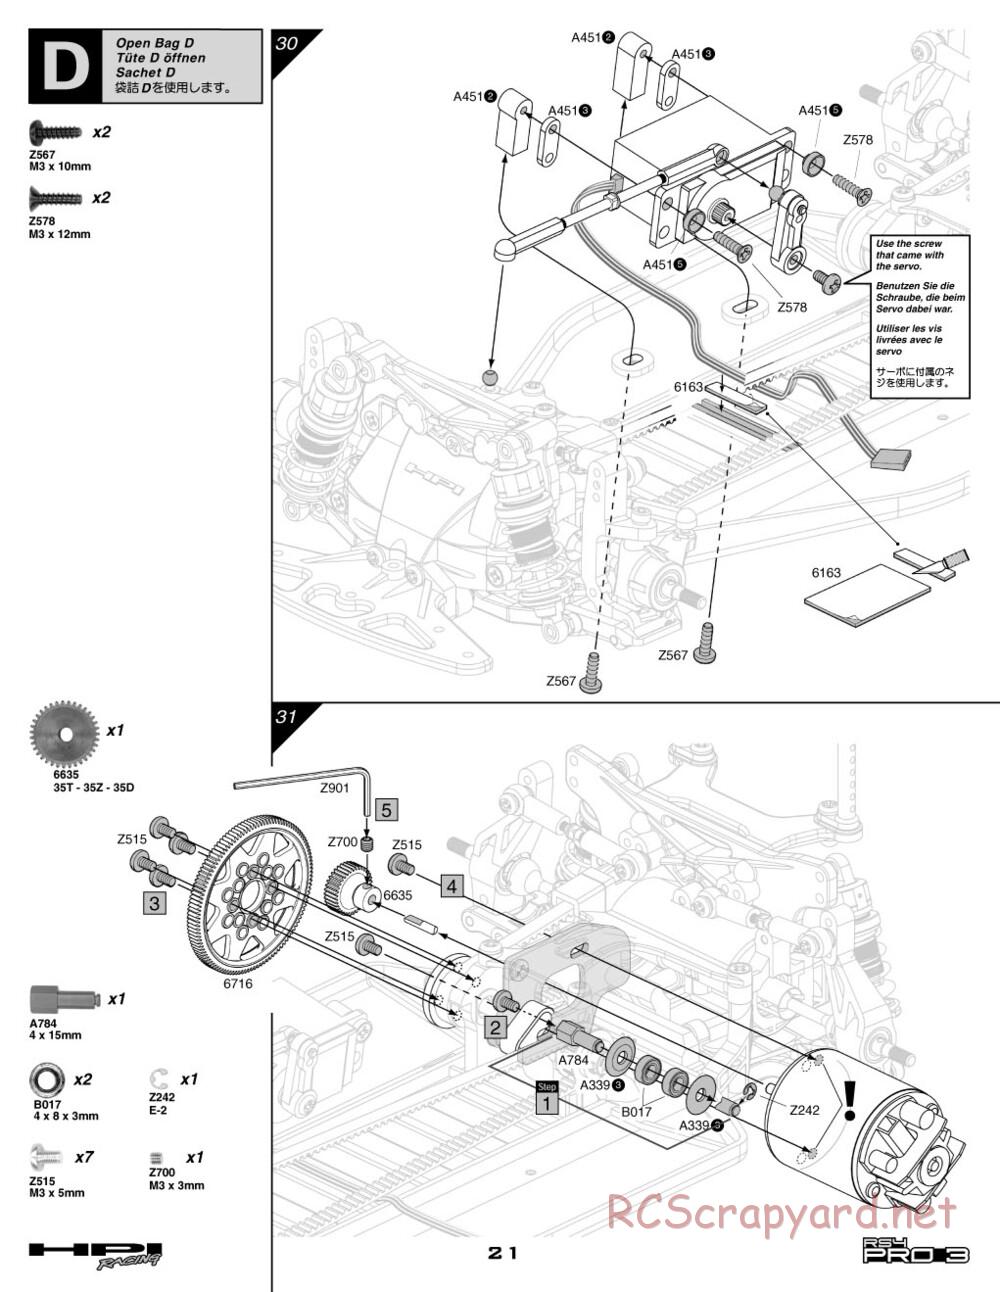 HPI - RS4 Pro 3 - Manual - Page 21